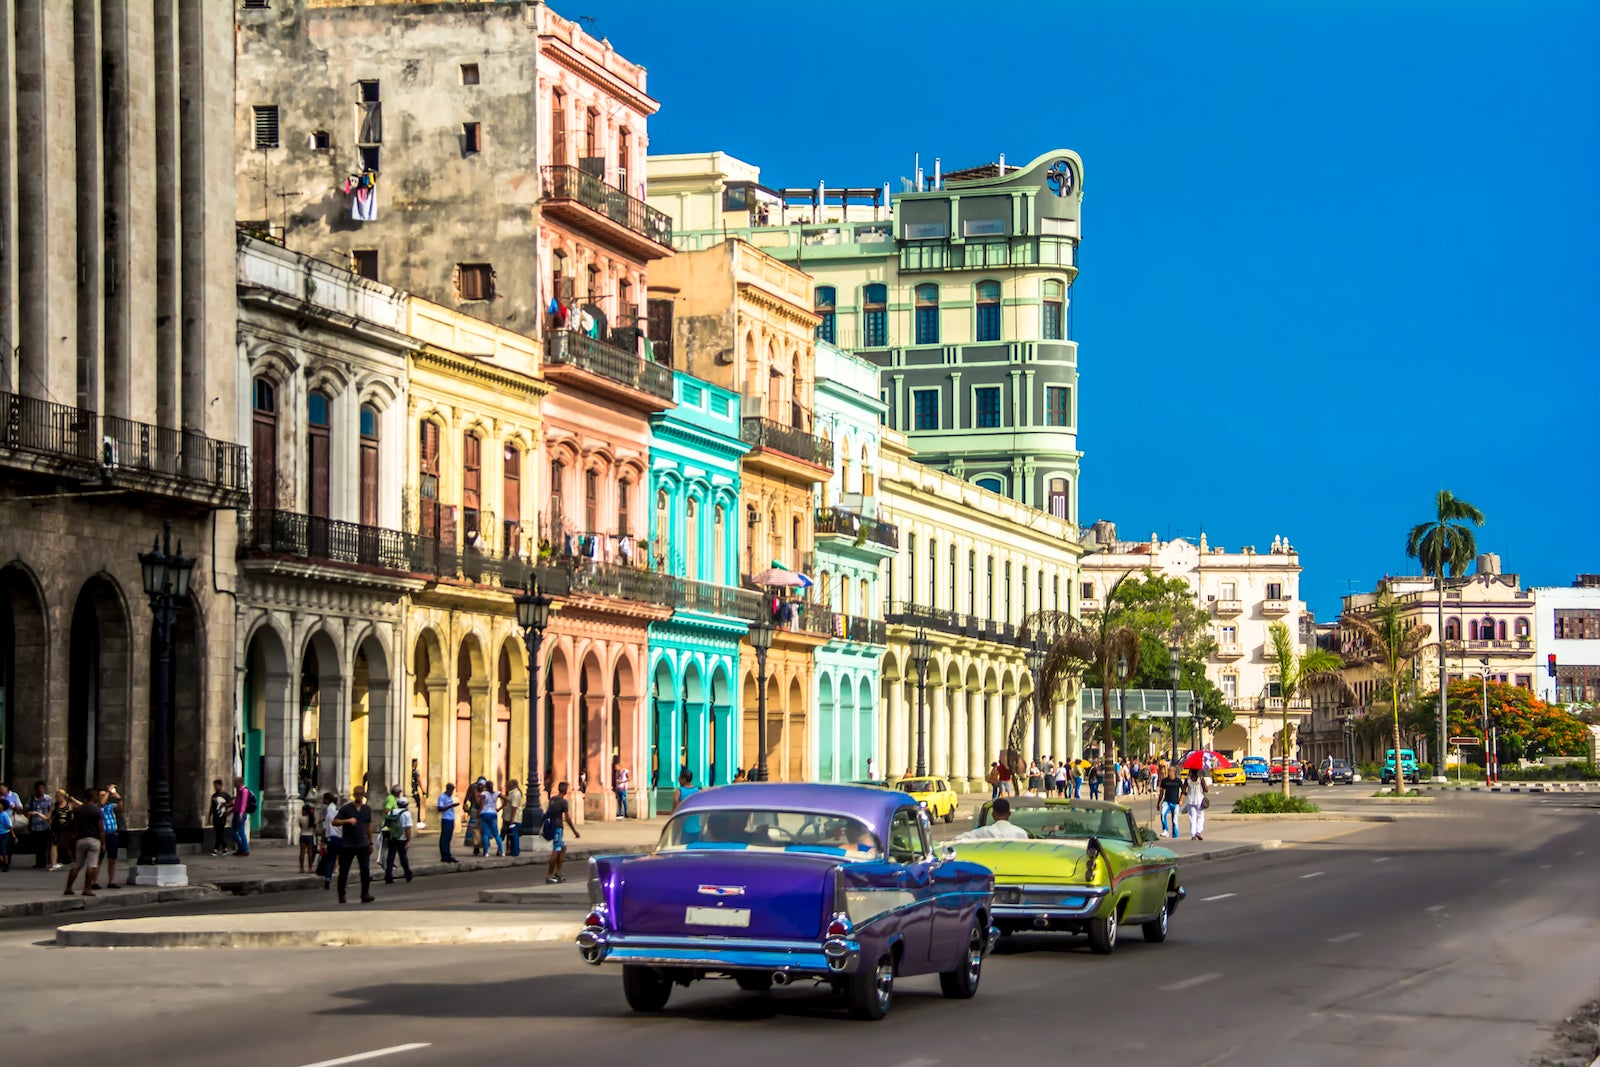 President Biden to lift many restrictions on travel to Cuba